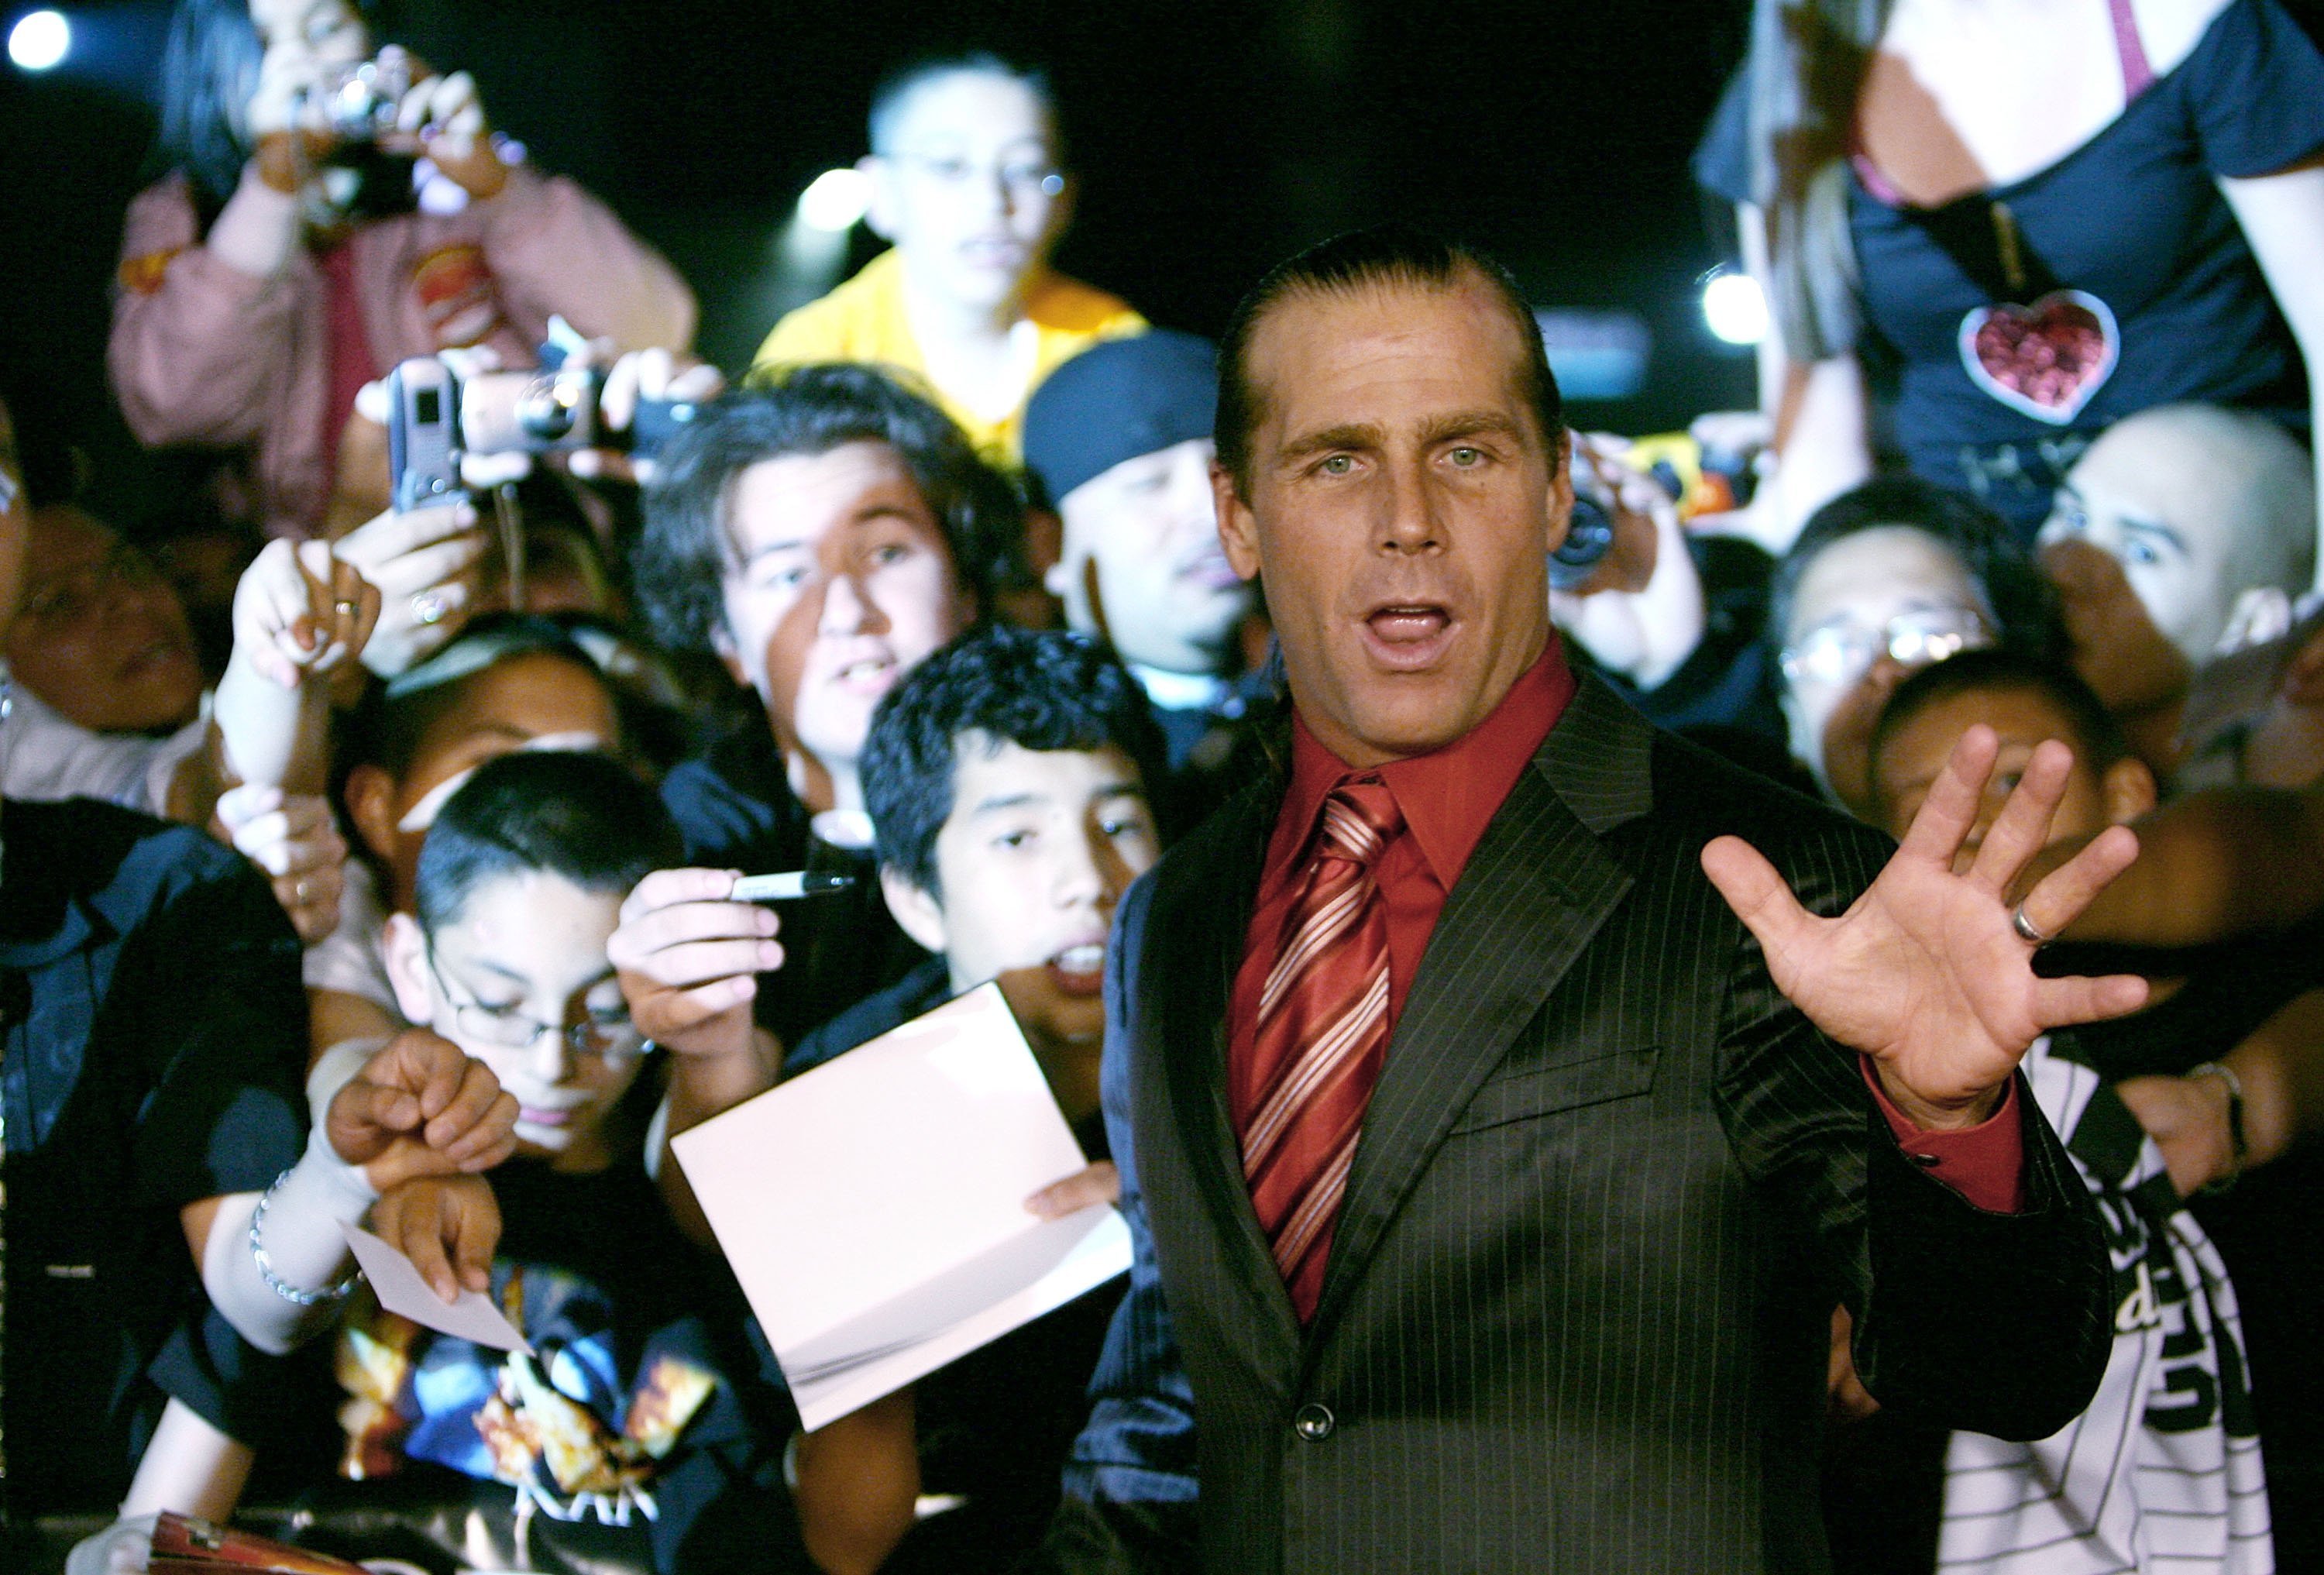 Shawn Michaels Recalls His Match From 1st Ever RAW From Inside The Manhattan Center Before RAW 25 (Video)